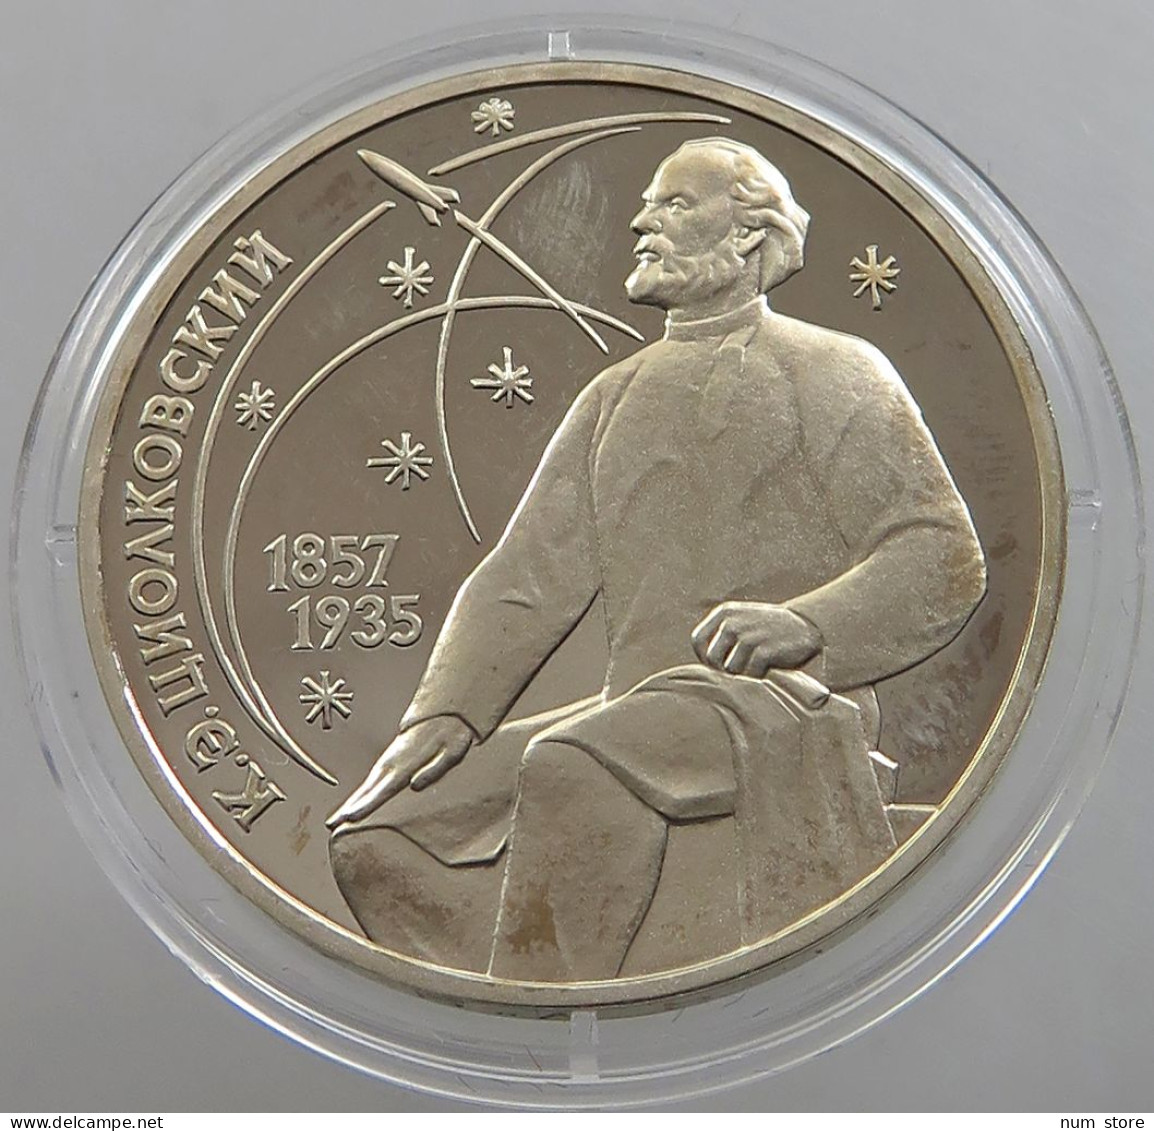 RUSSIA USSR 1 ROUBLE 1987 Tsiolkovsky PROOF #sm14 0643 - Russland